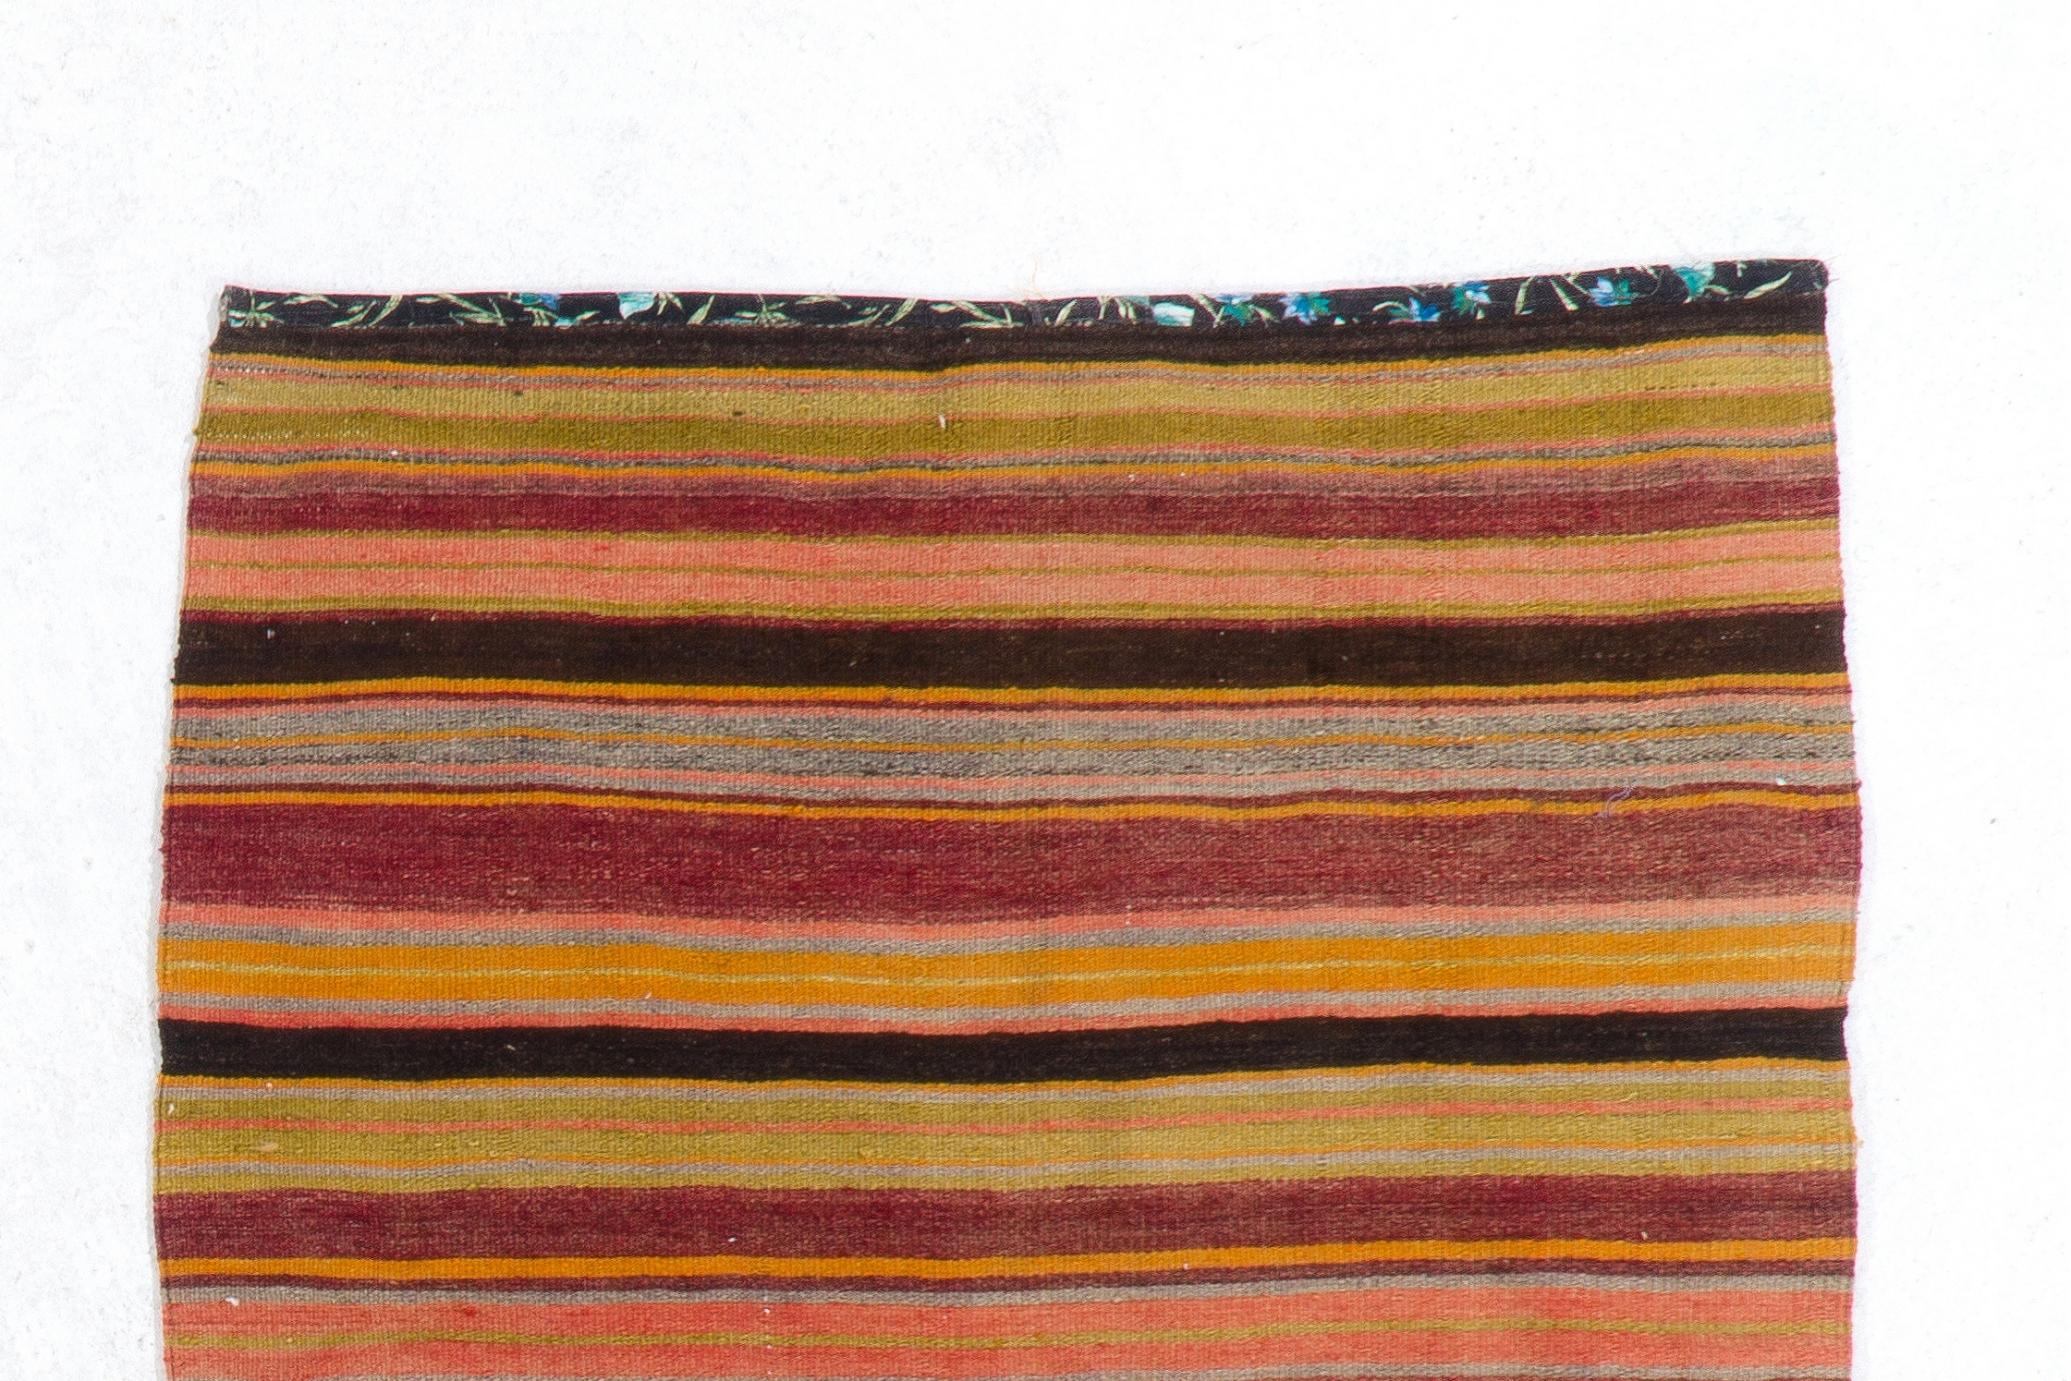 Vintage handwoven Turkish accent kilim/flat-weave with stripes in a rainbow of warm, lively colors including burgundy, peach, orange, grass green, light blue and dark brown. Made with 100% organic sheep's wool.

It is in good condition with no